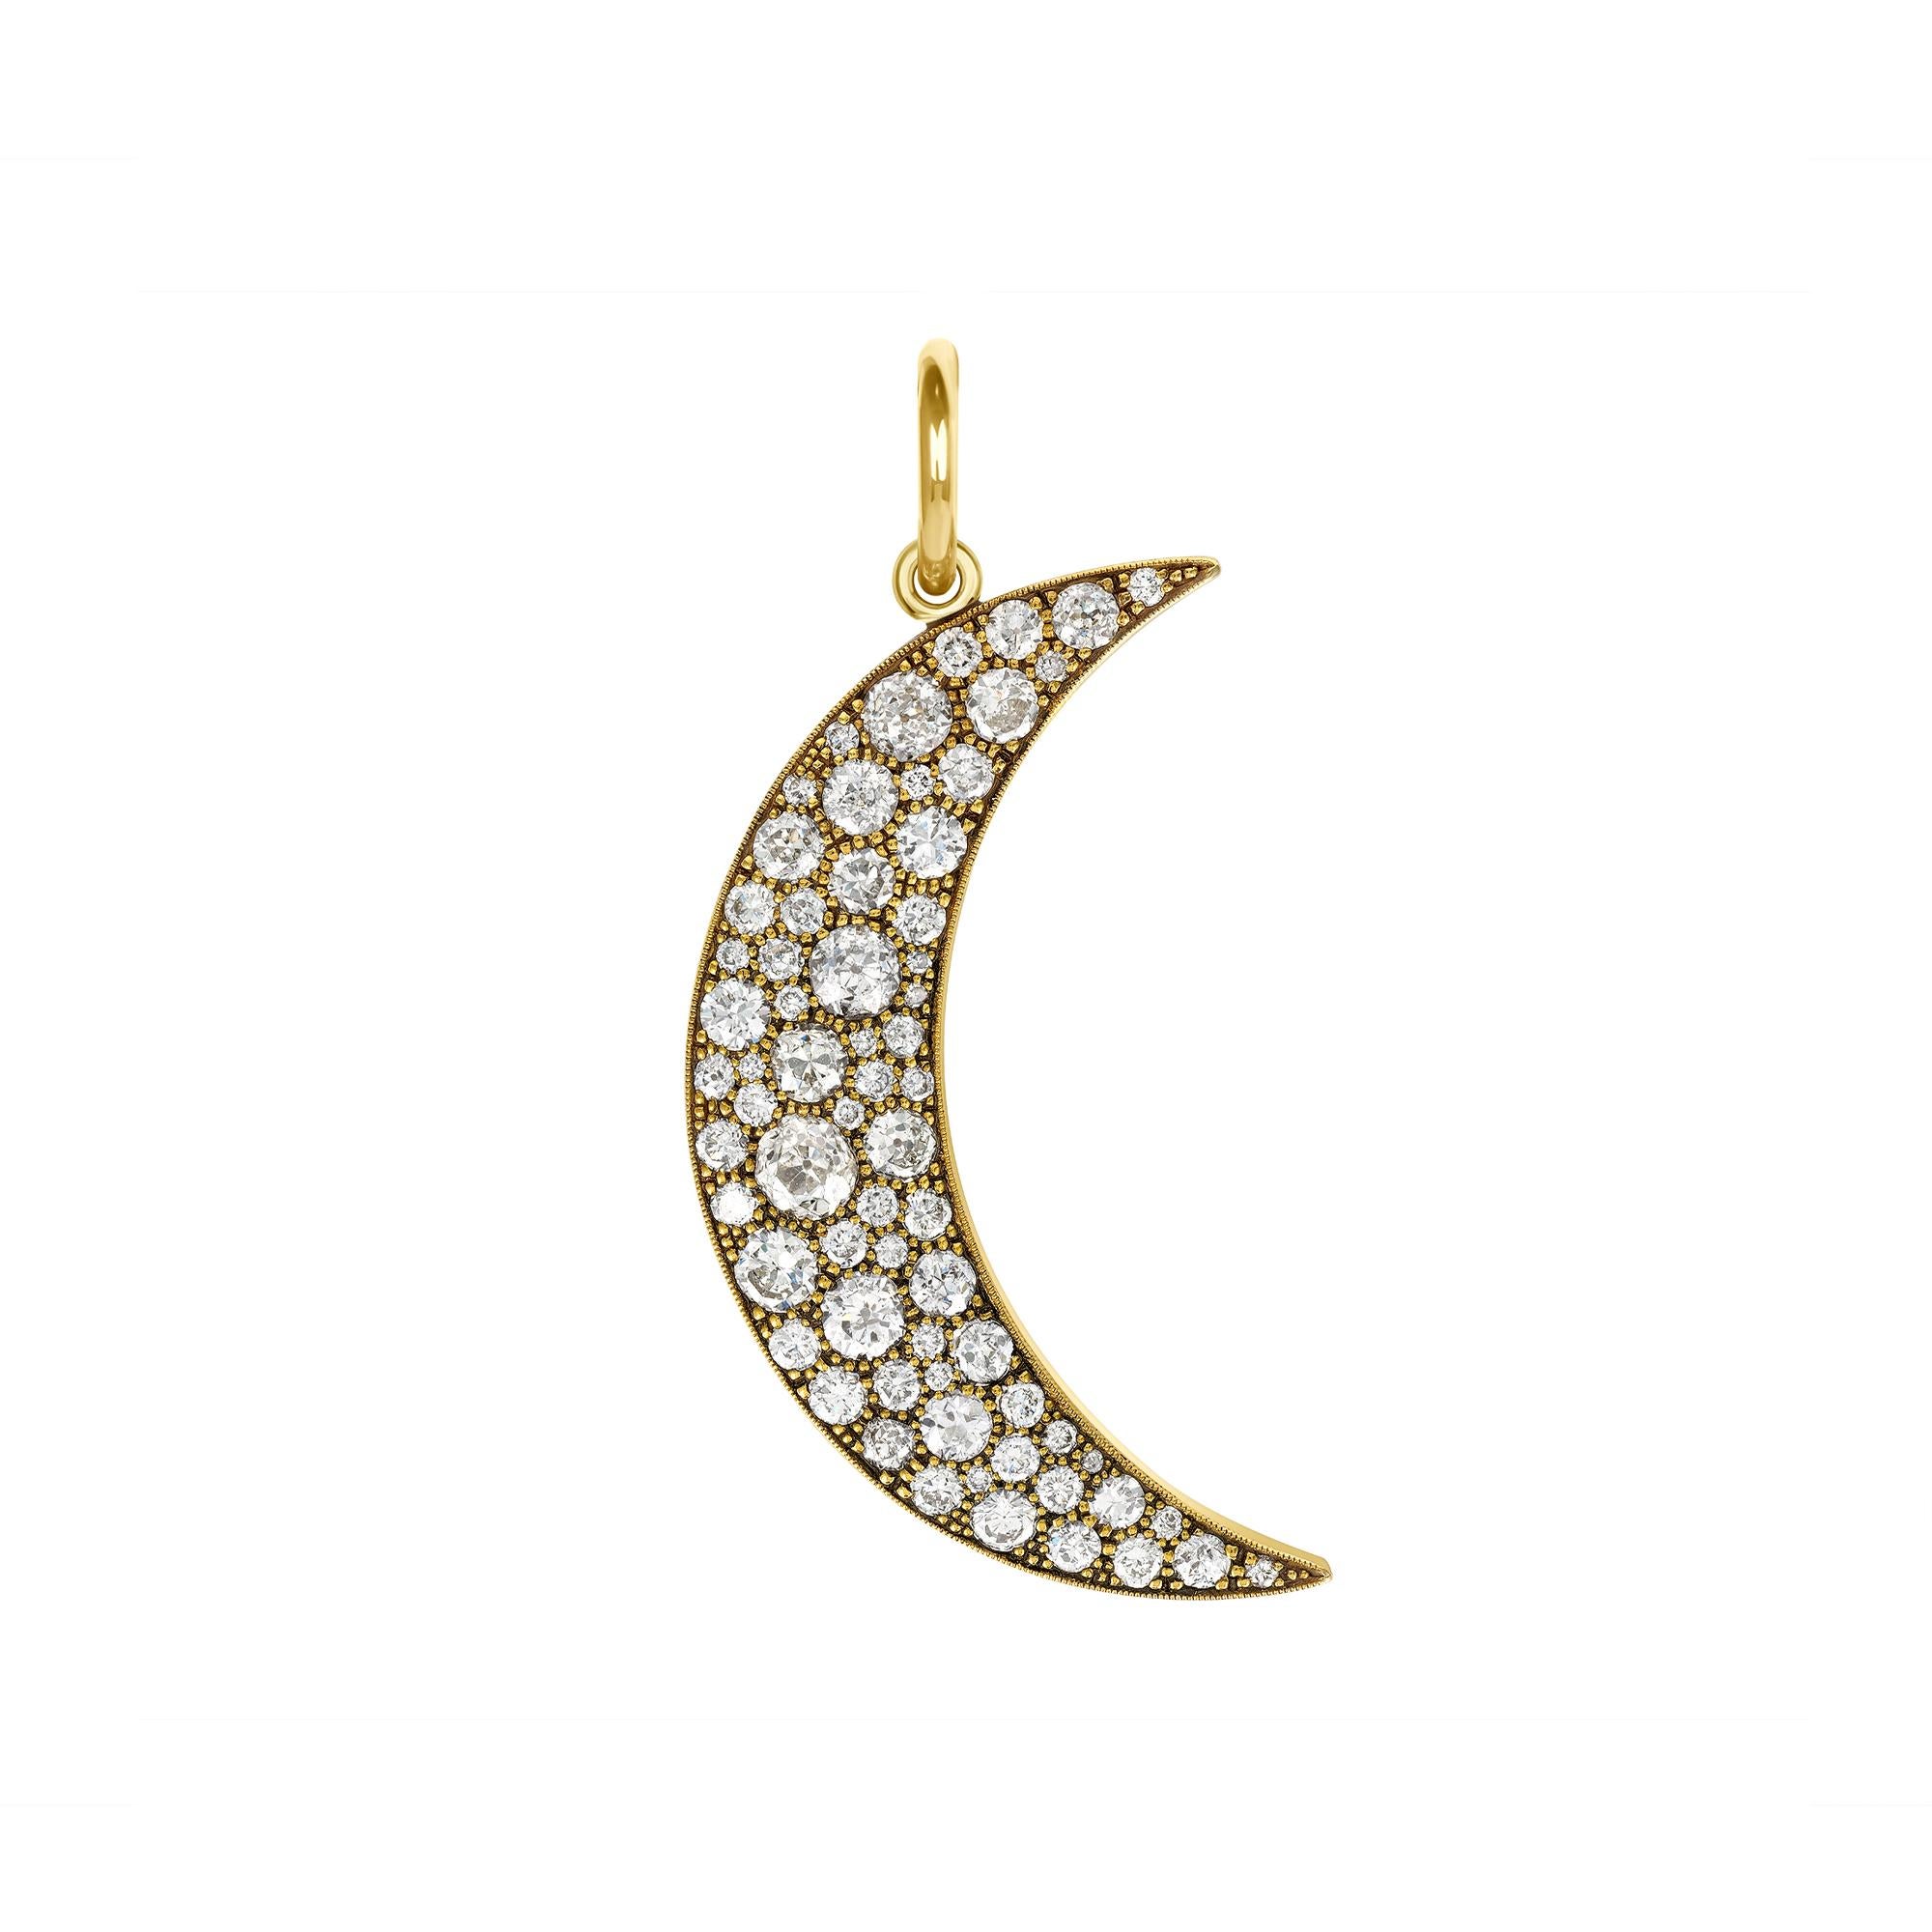 Approximately 4.20ctw varying old cut and round brilliant cut diamonds set in a handcrafted 18K yellow gold crescent moon shaped pendant.